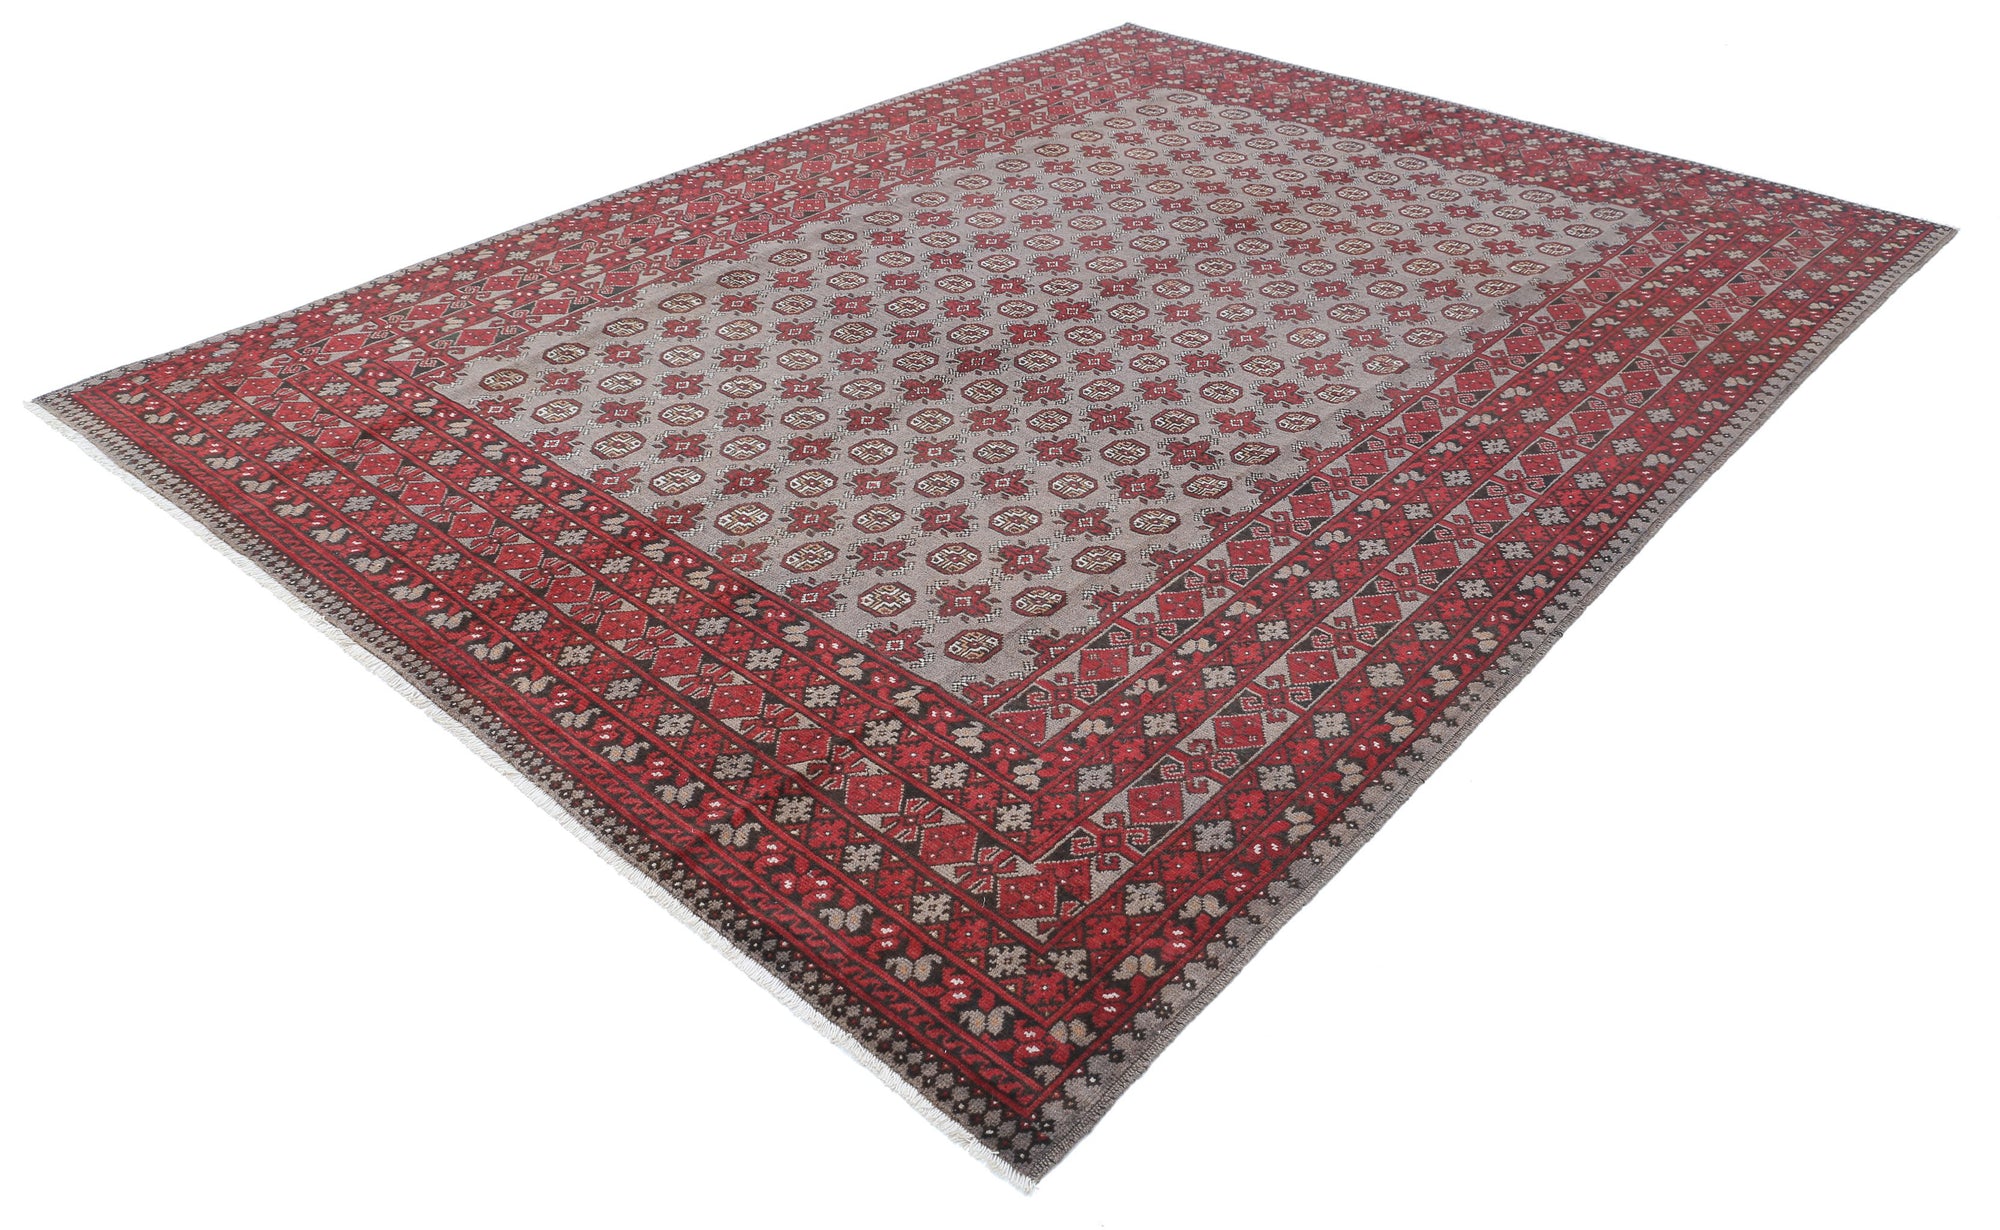 Revival-hand-knotted-gul-collection-wool-rug-5013984-2.jpg